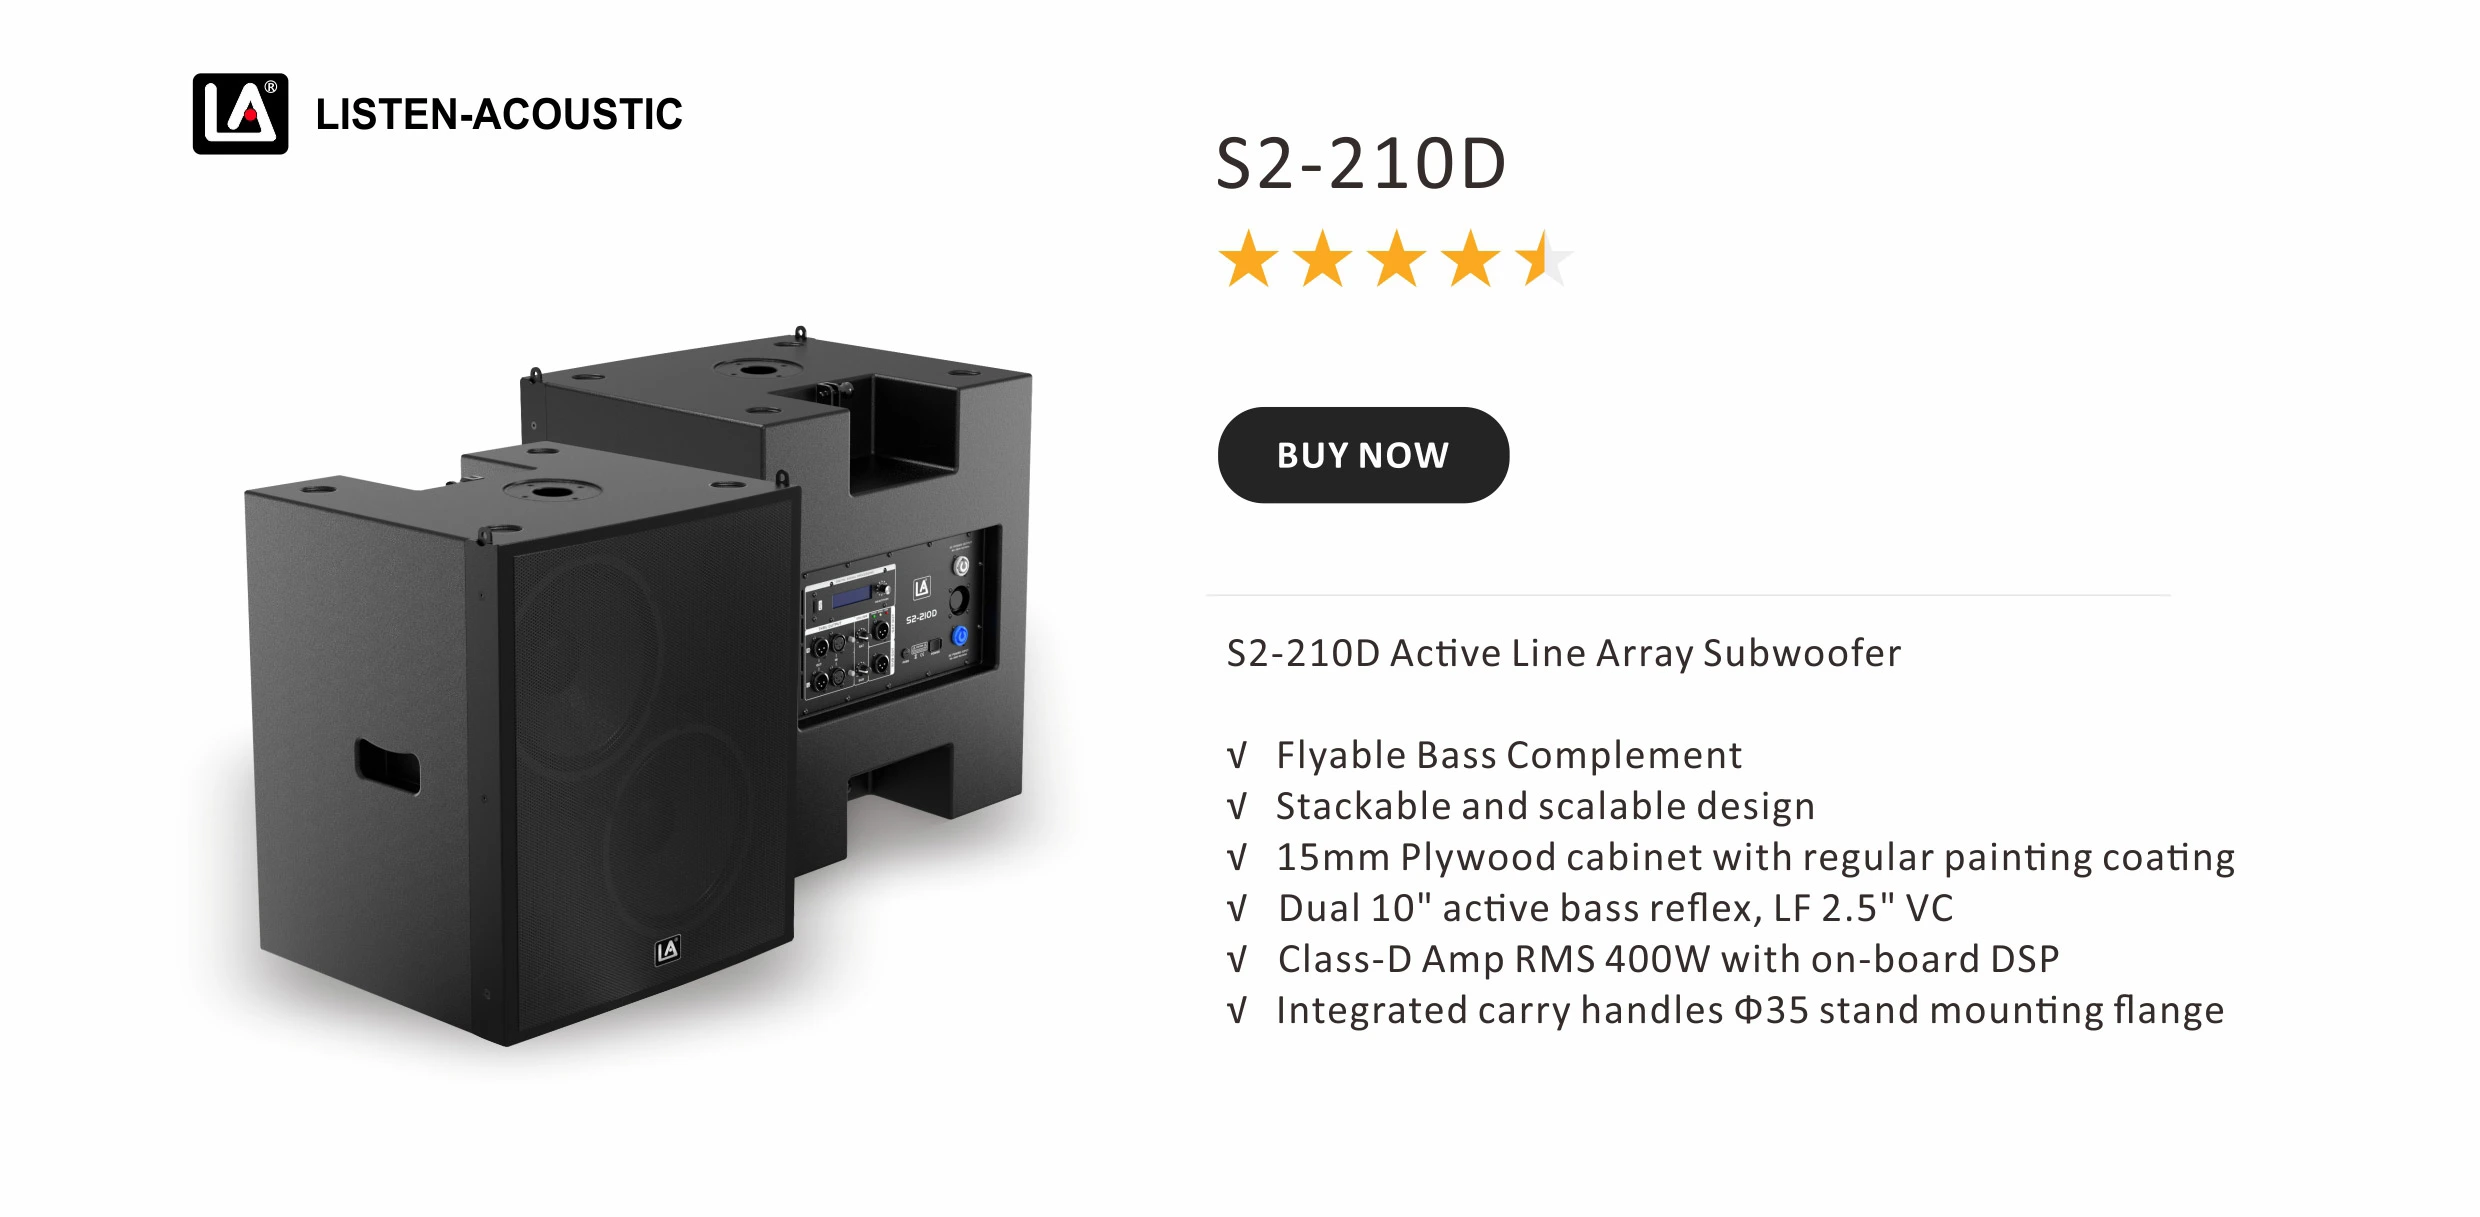 S2-210D Active Line Array Subwoofer √ Flyable Bass Complement √ Stackable and scalable design √ 15mm Plywood cabinet with regular painting coating √ Dual 10